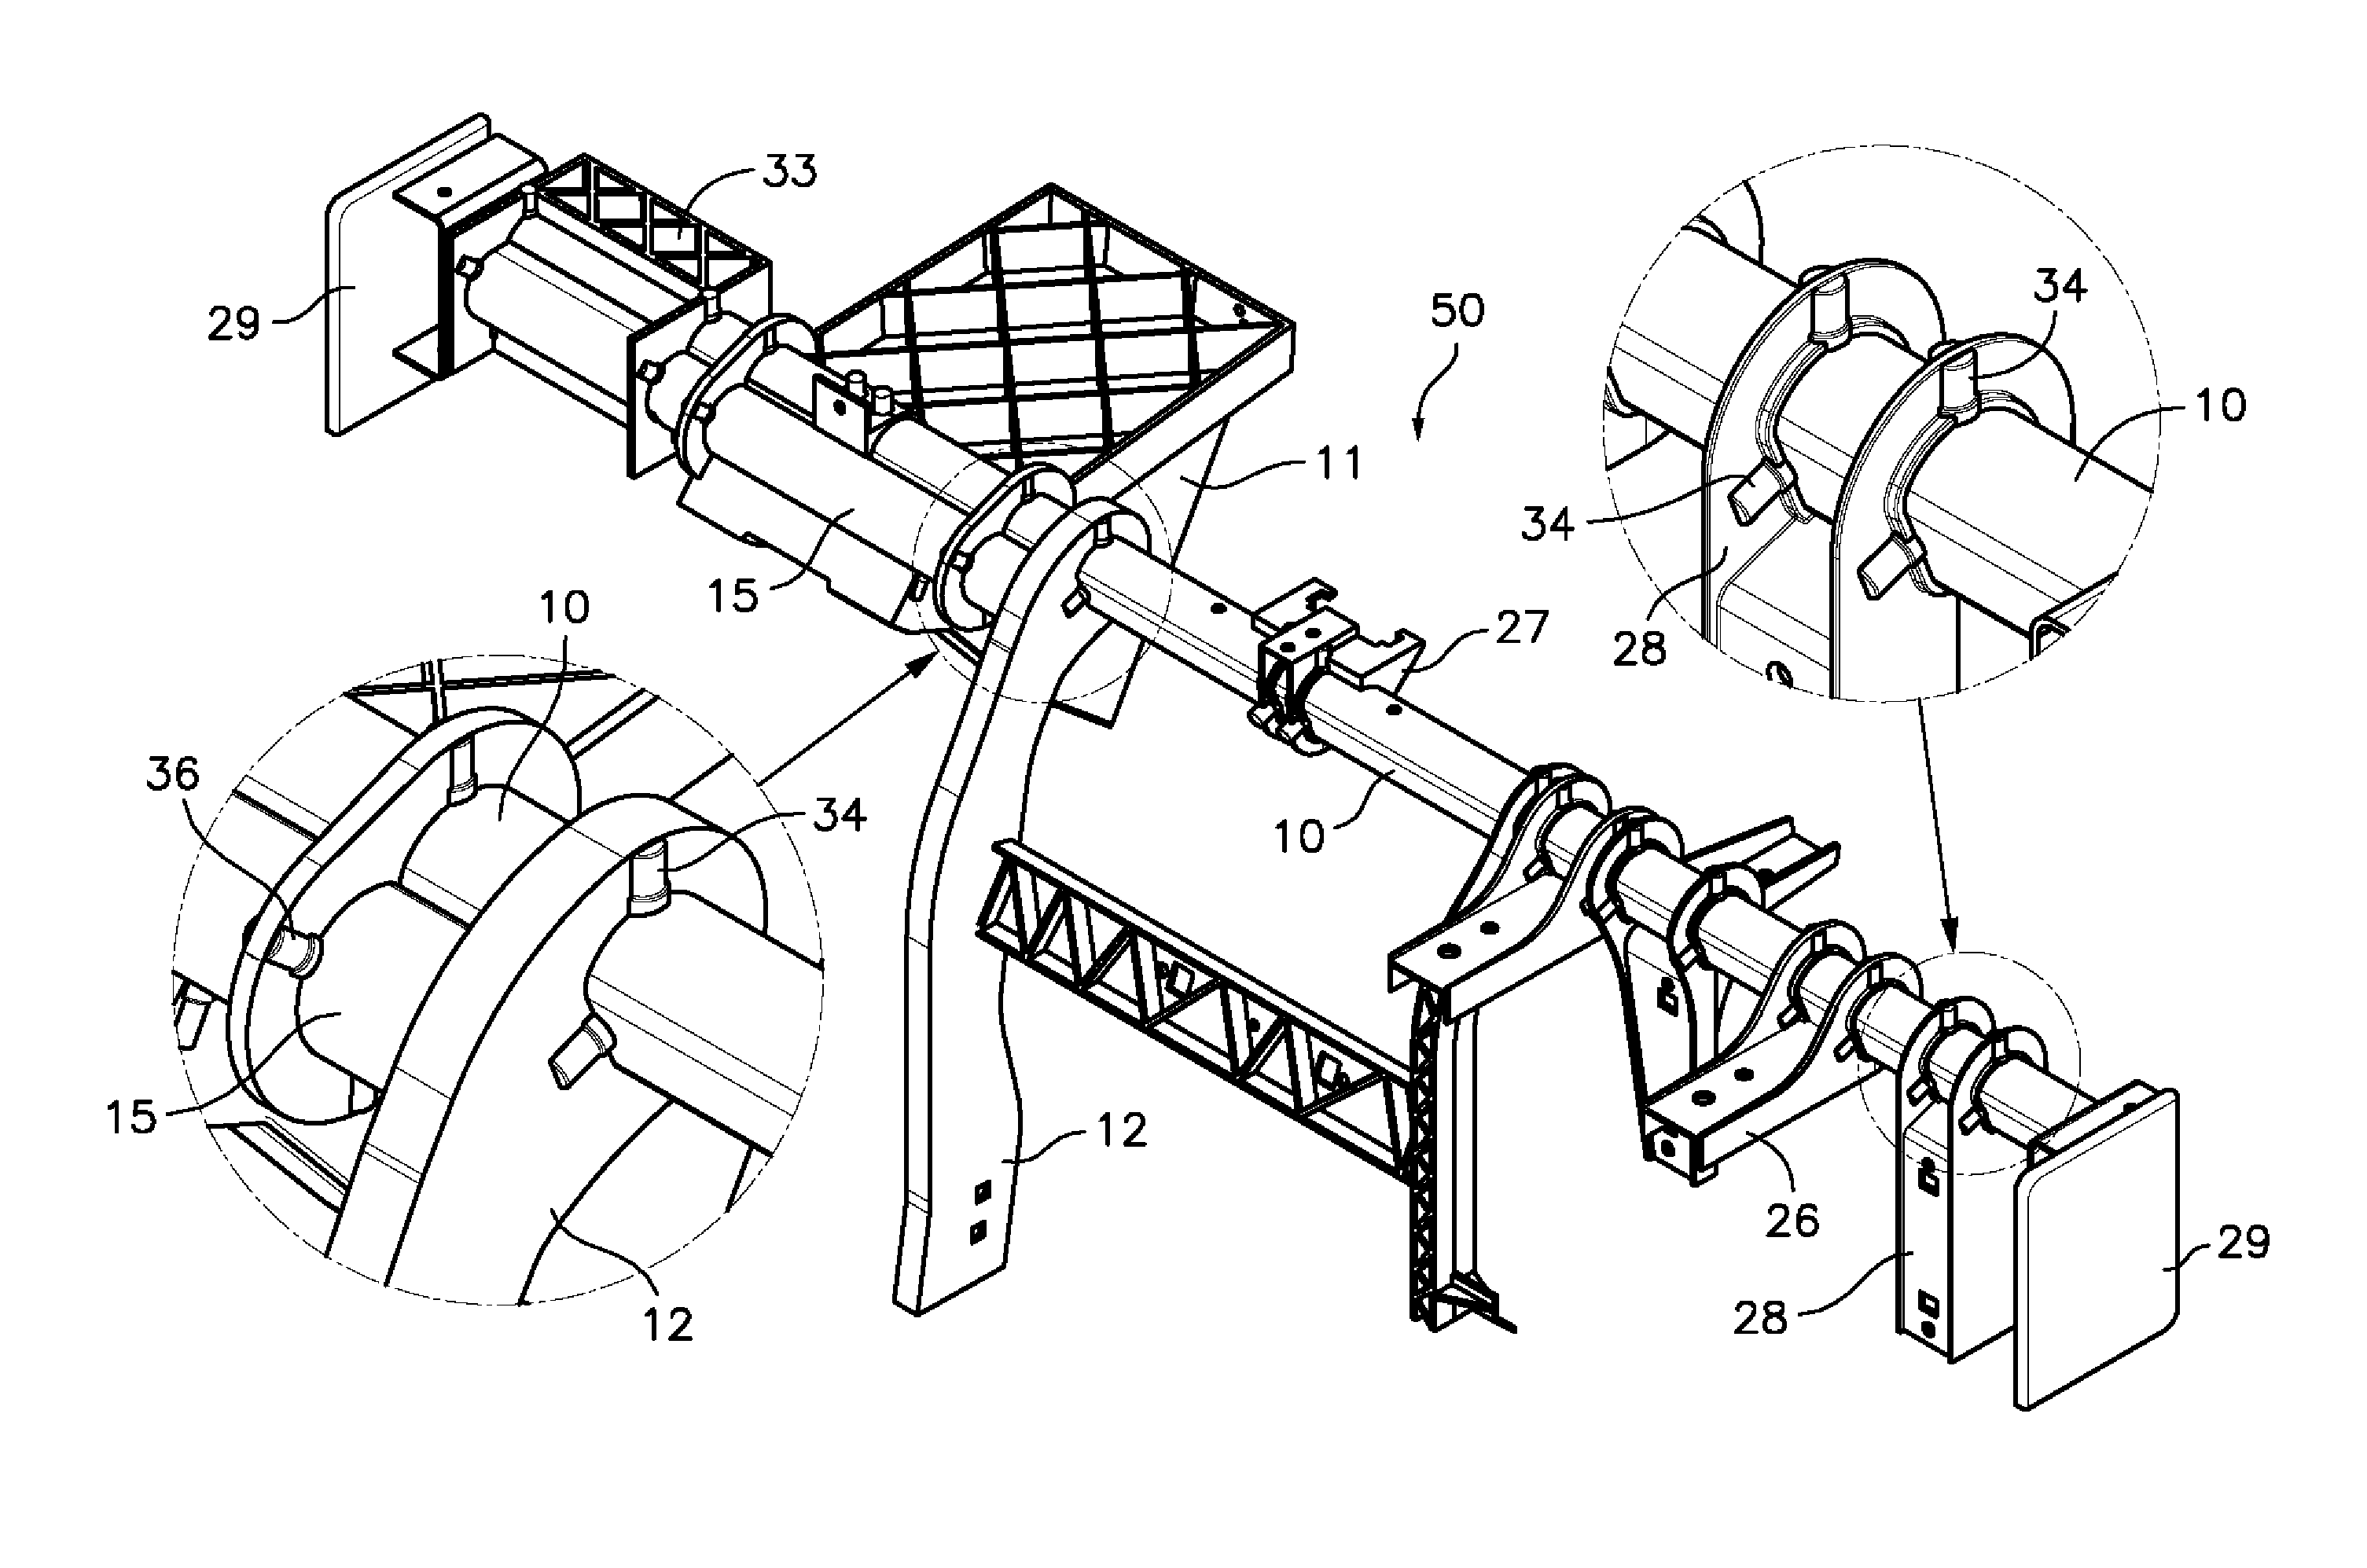 Metal-plastic hybrid support structure applicable to a dashboard support of a vehicle